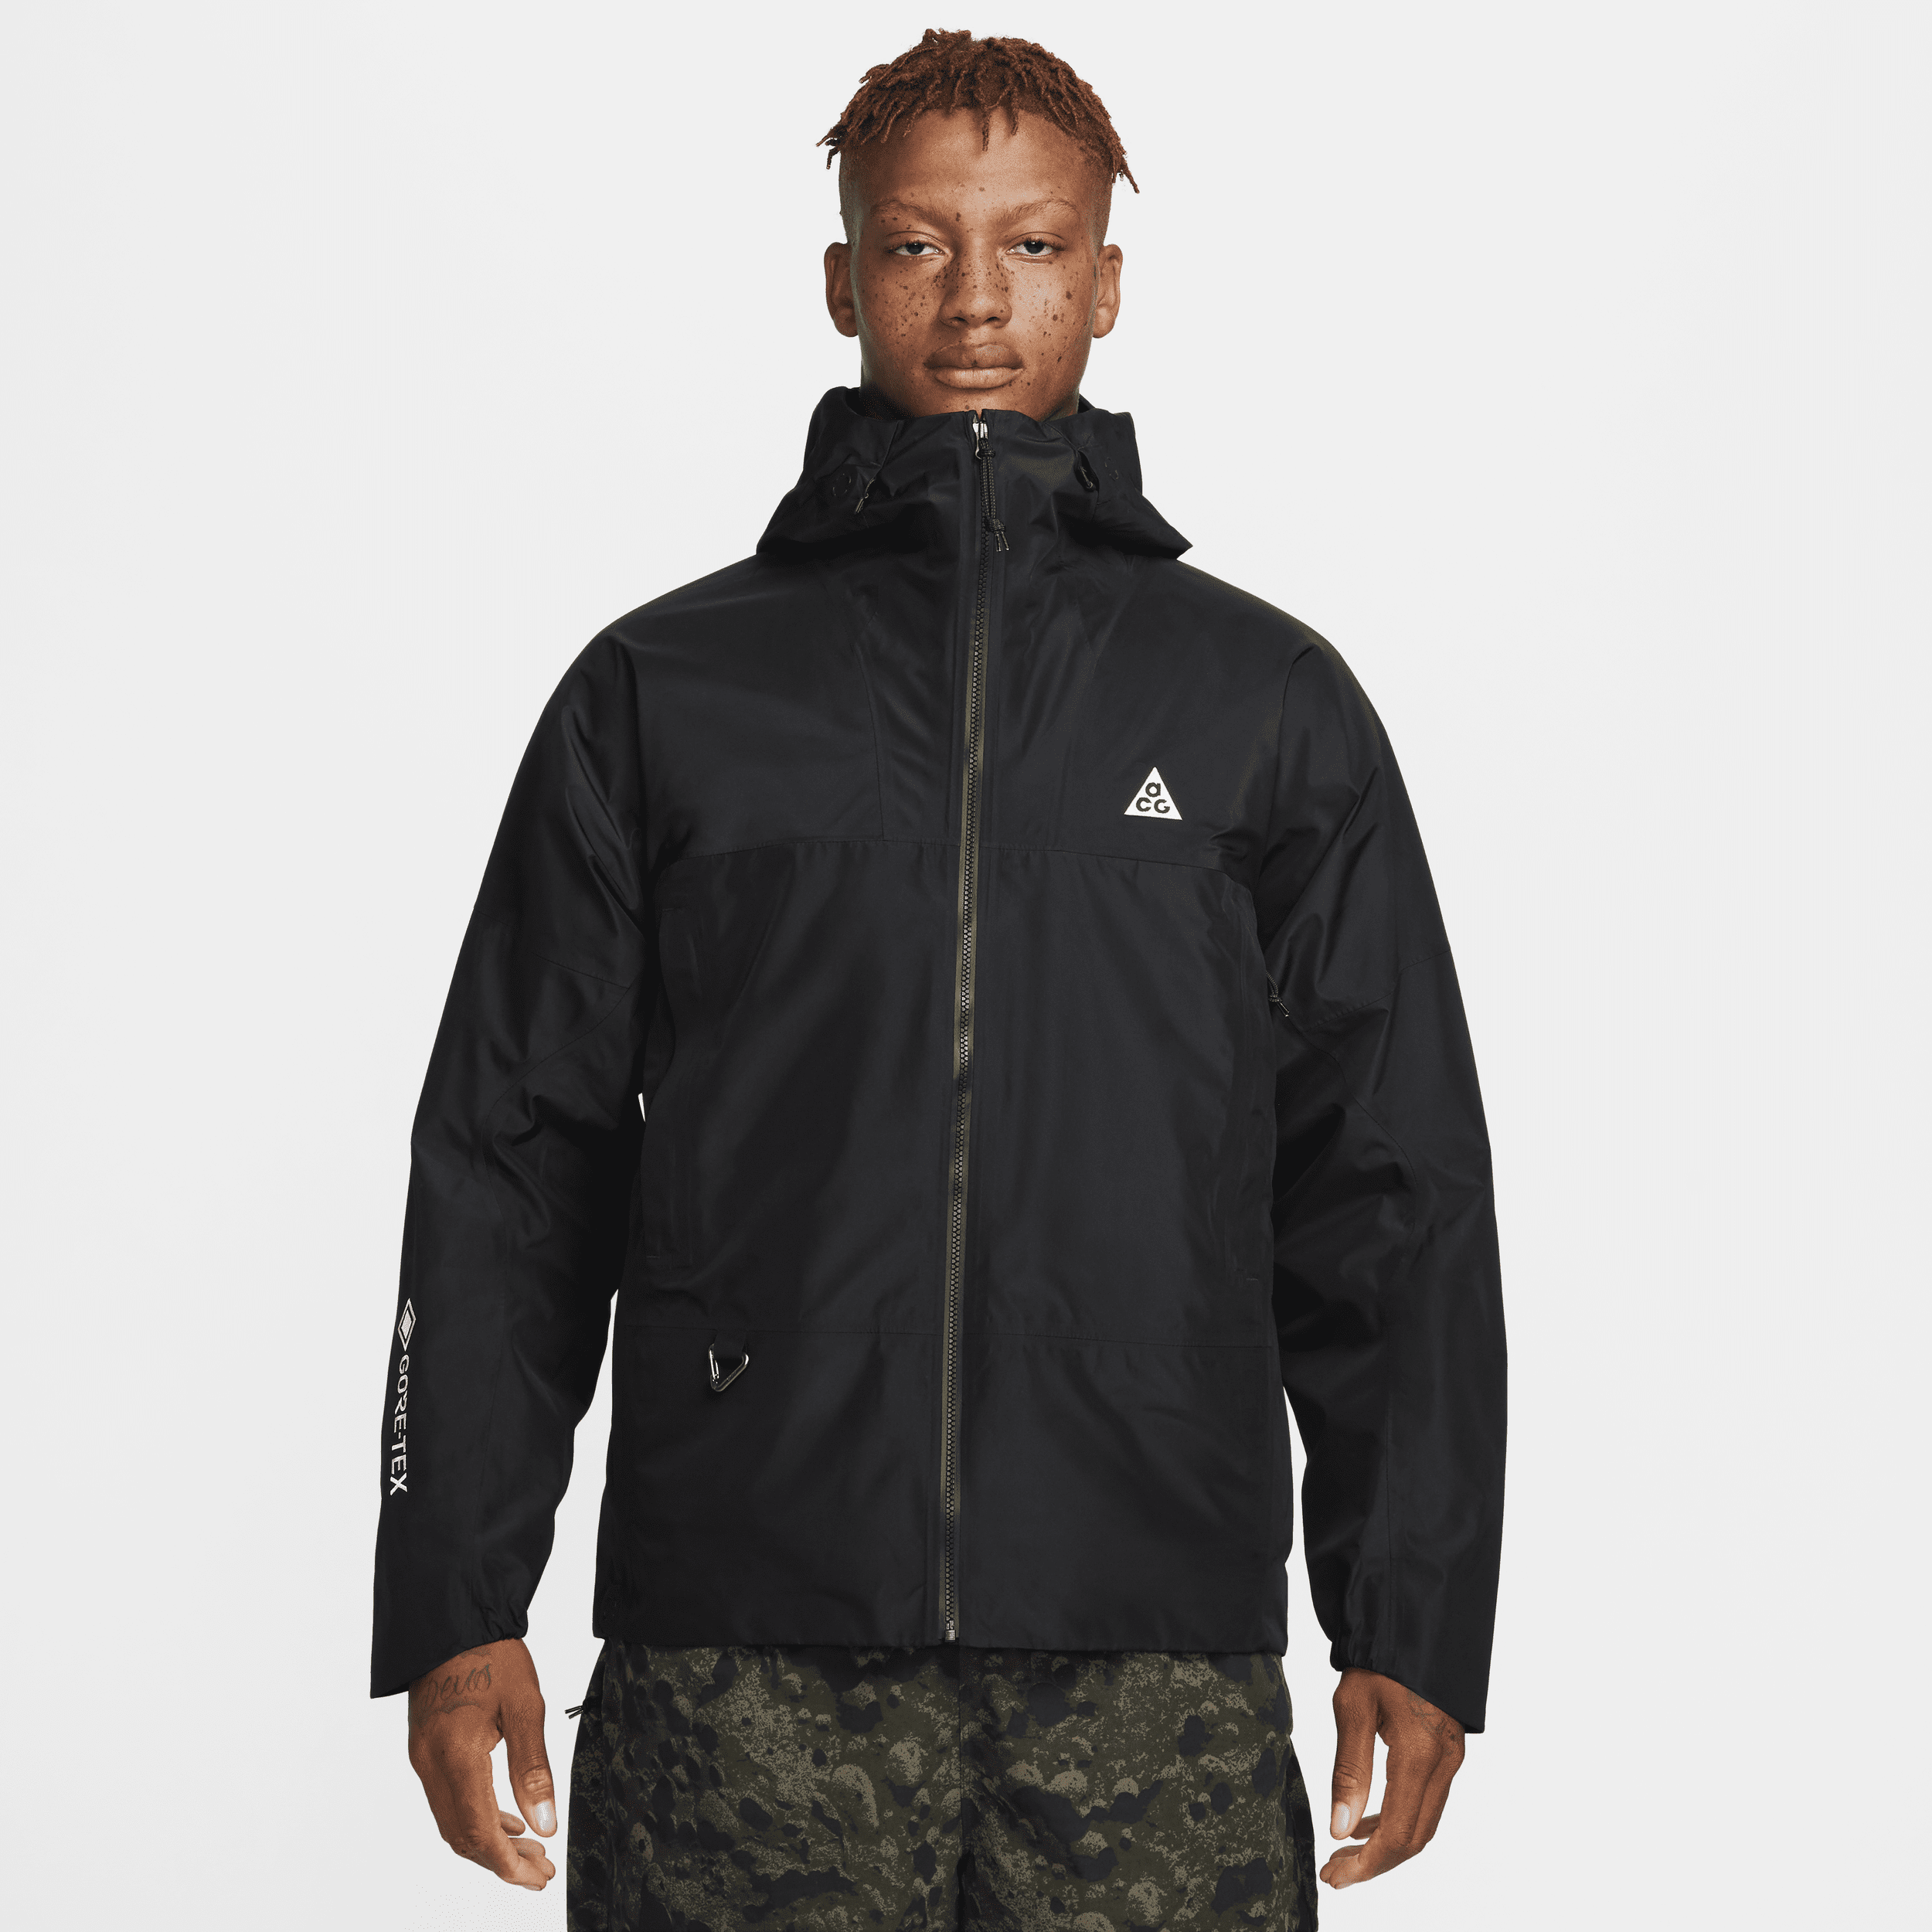 NIKE MEN'S STORM-FIT ADV ACG "CHAIN OF CRATERS" JACKET,1012036547